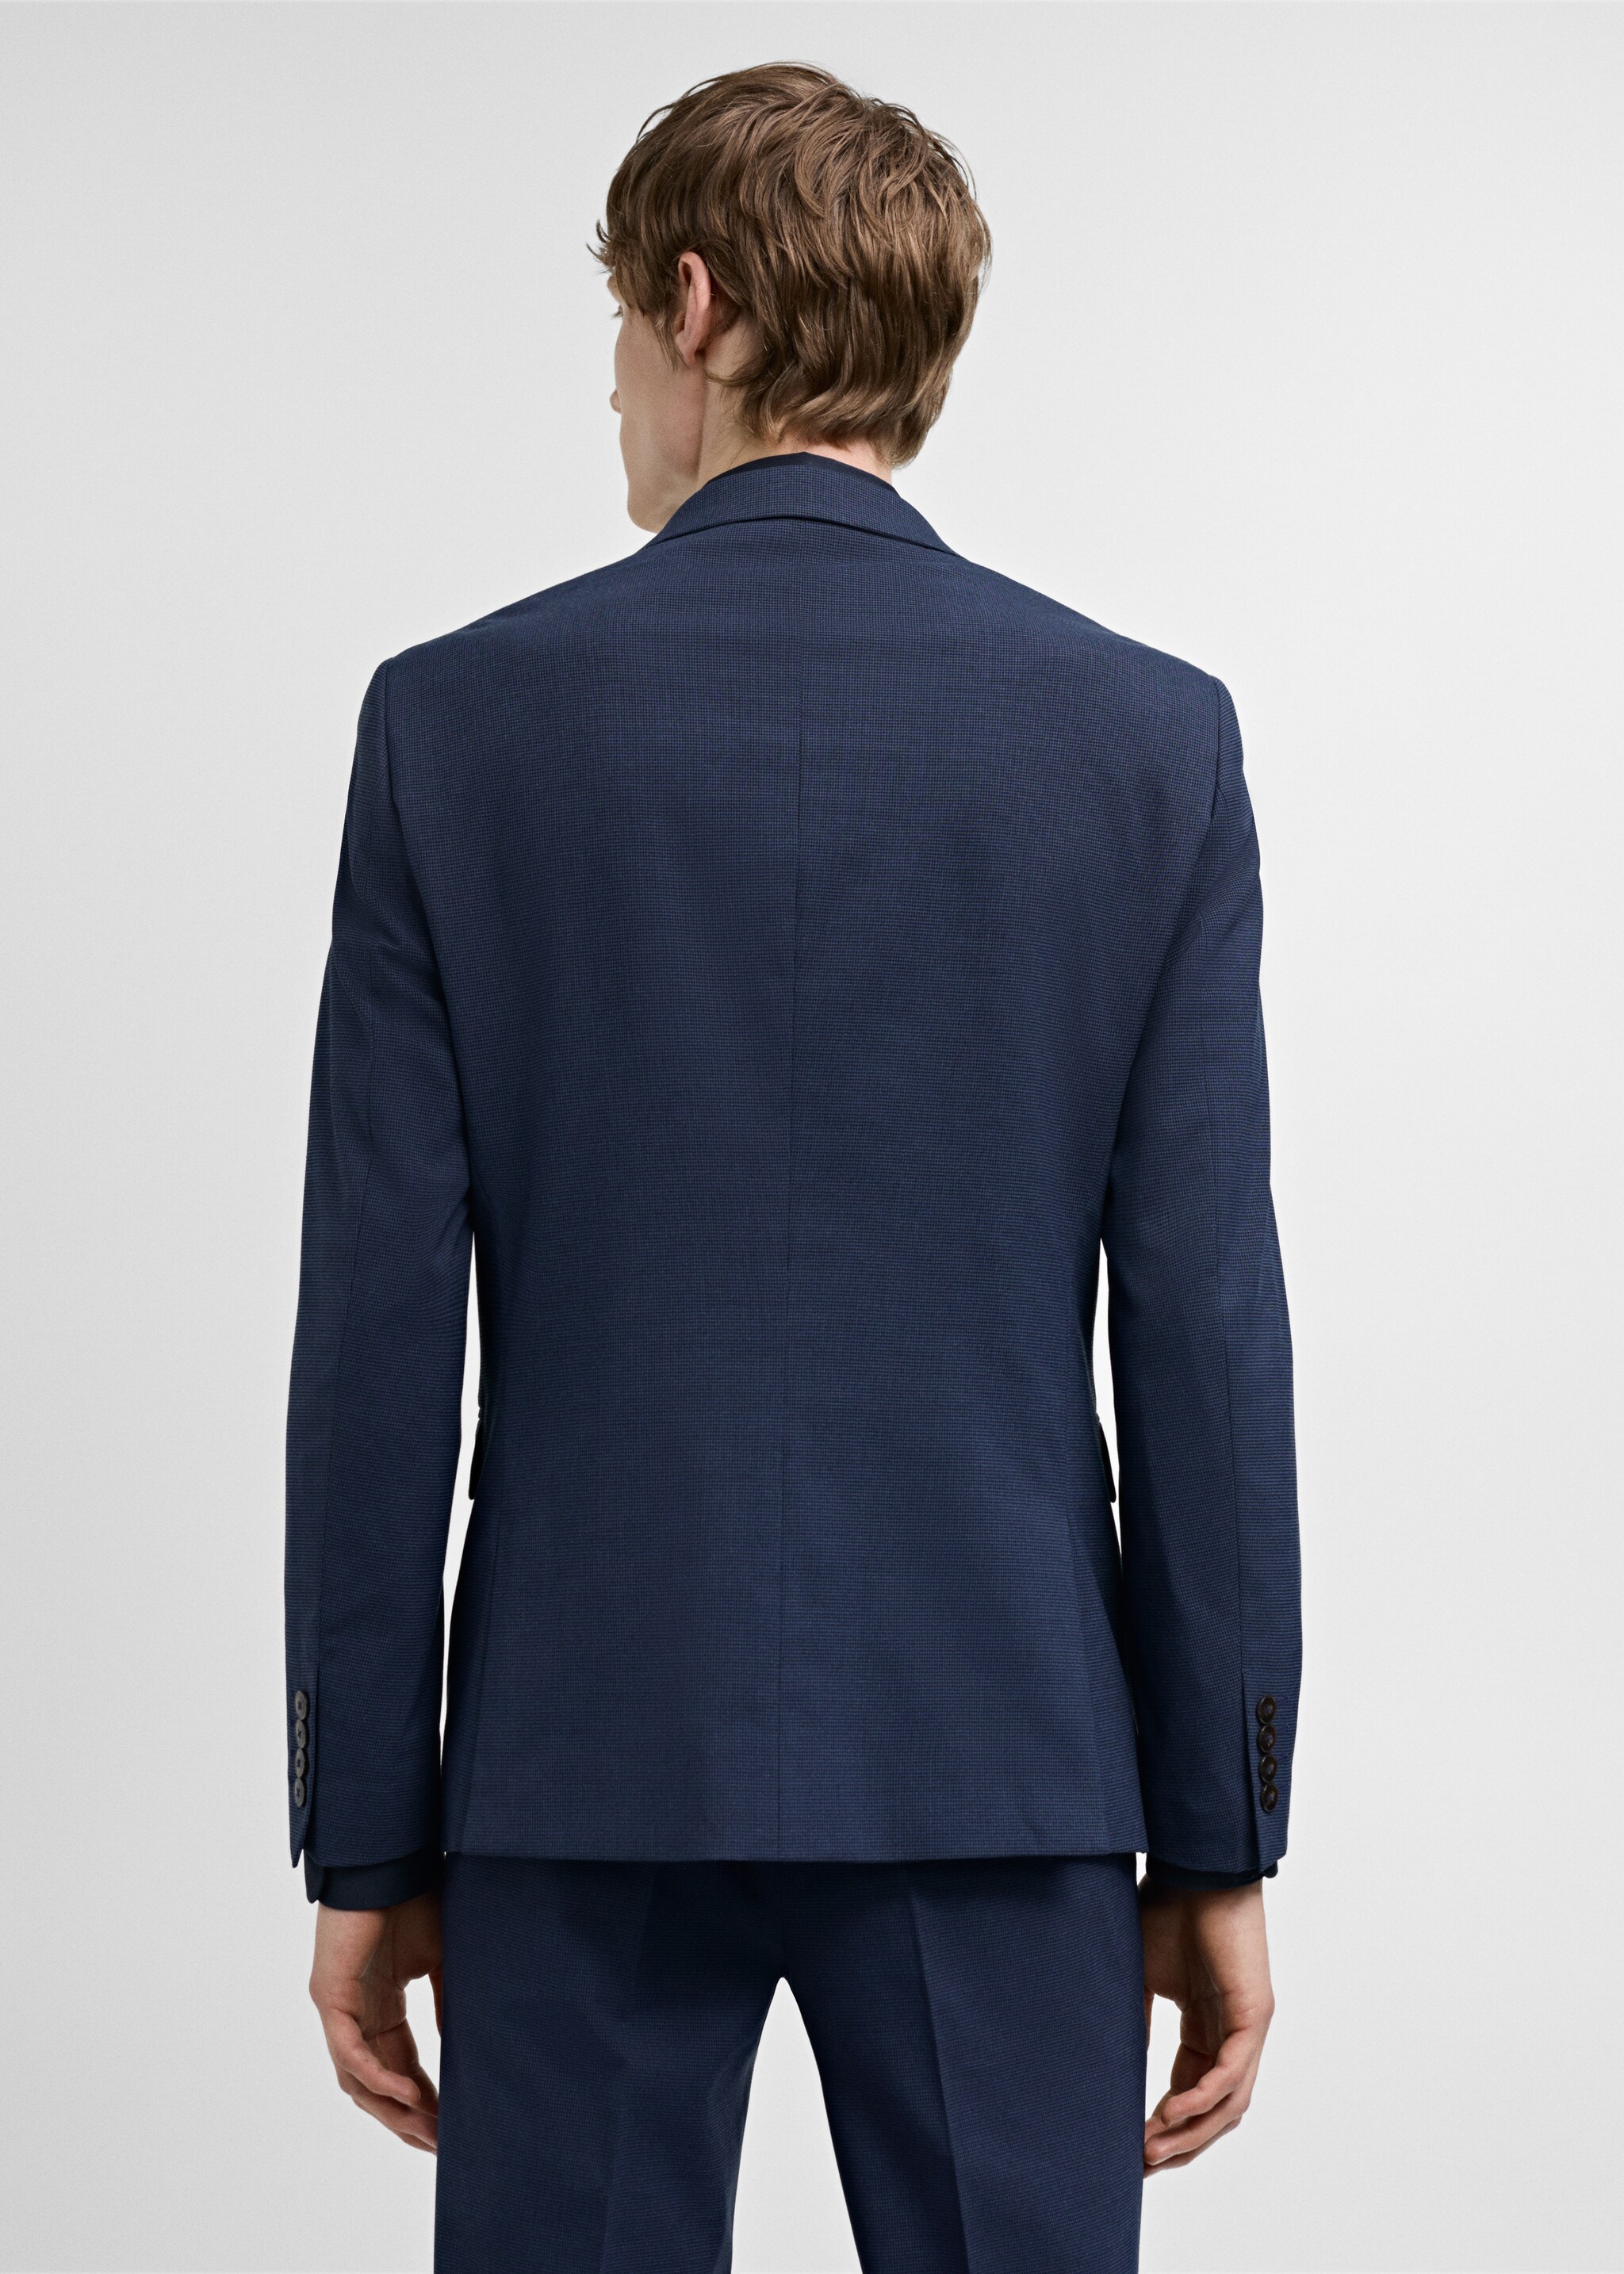 Super slim-fit suit jacket in stretch fabric - Reverse of the article